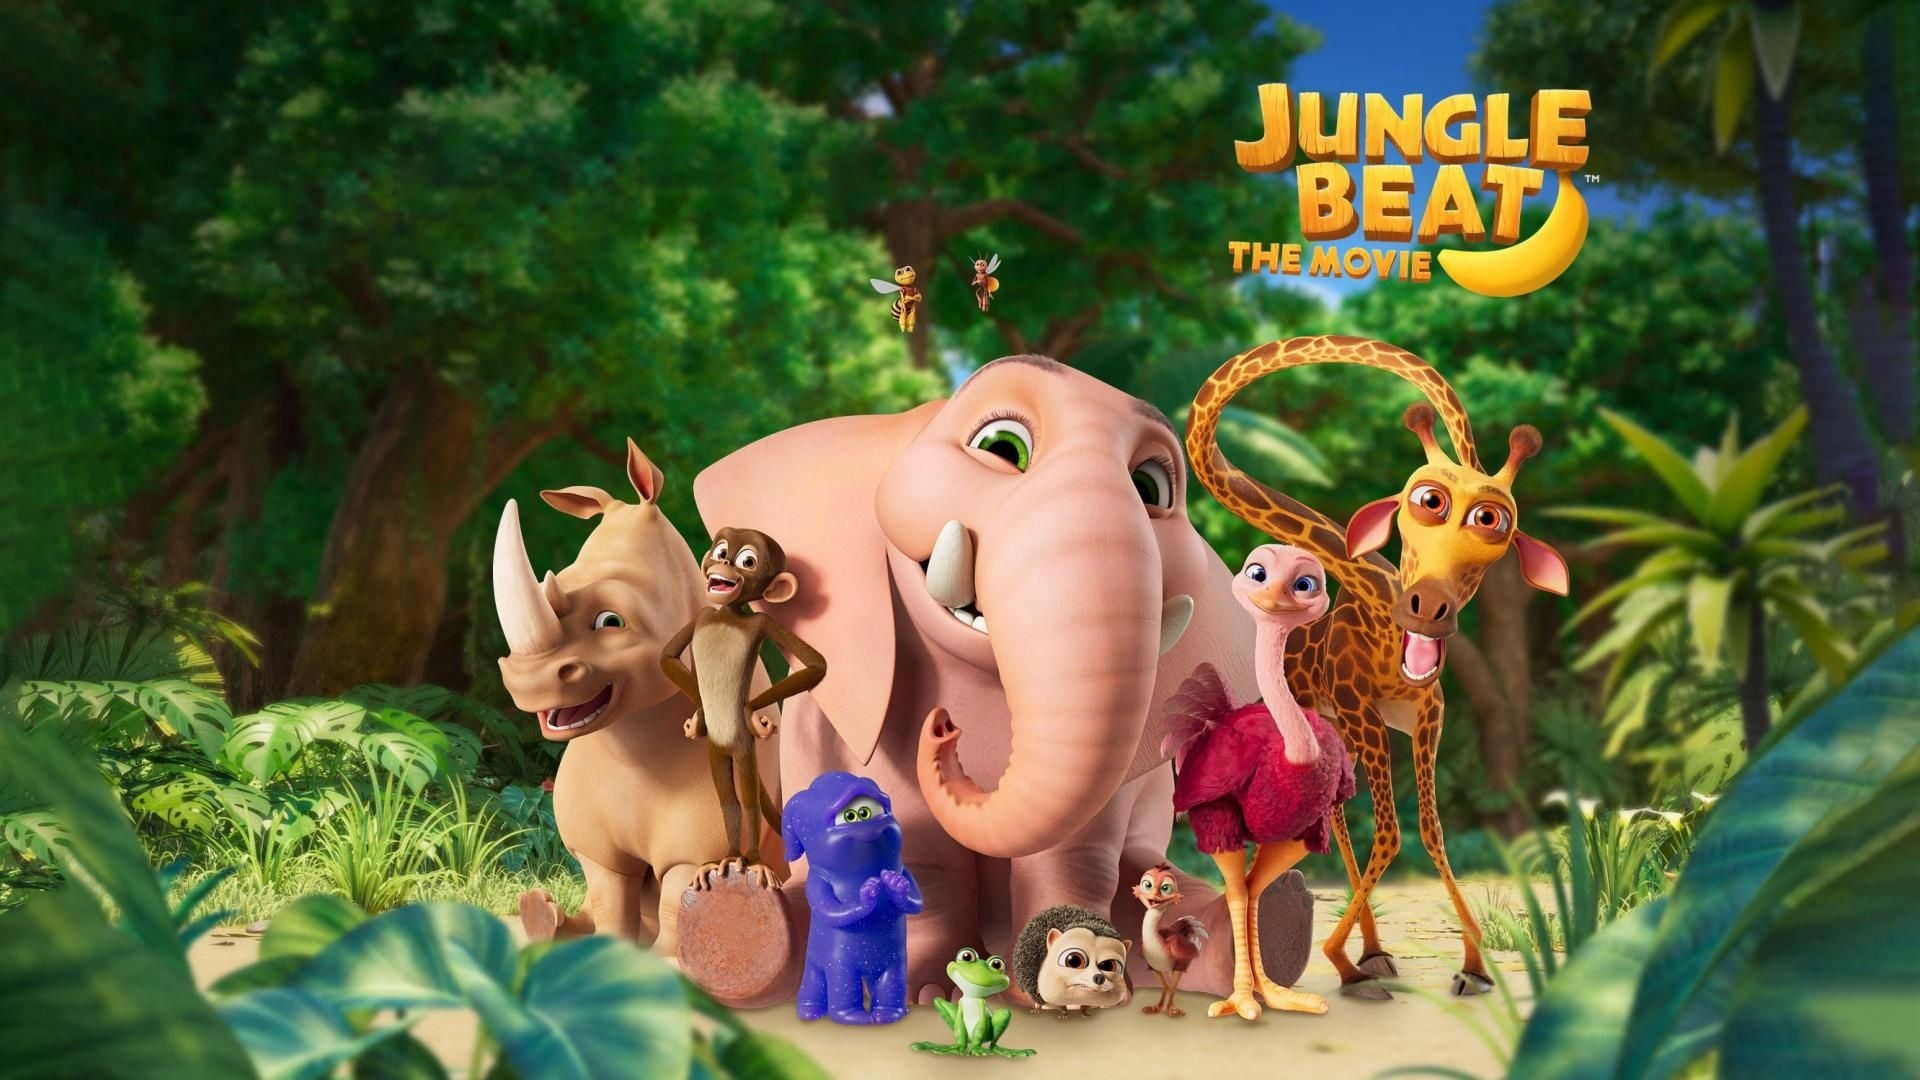 Jungle Beat: The Movie Soundtrack Music Song List